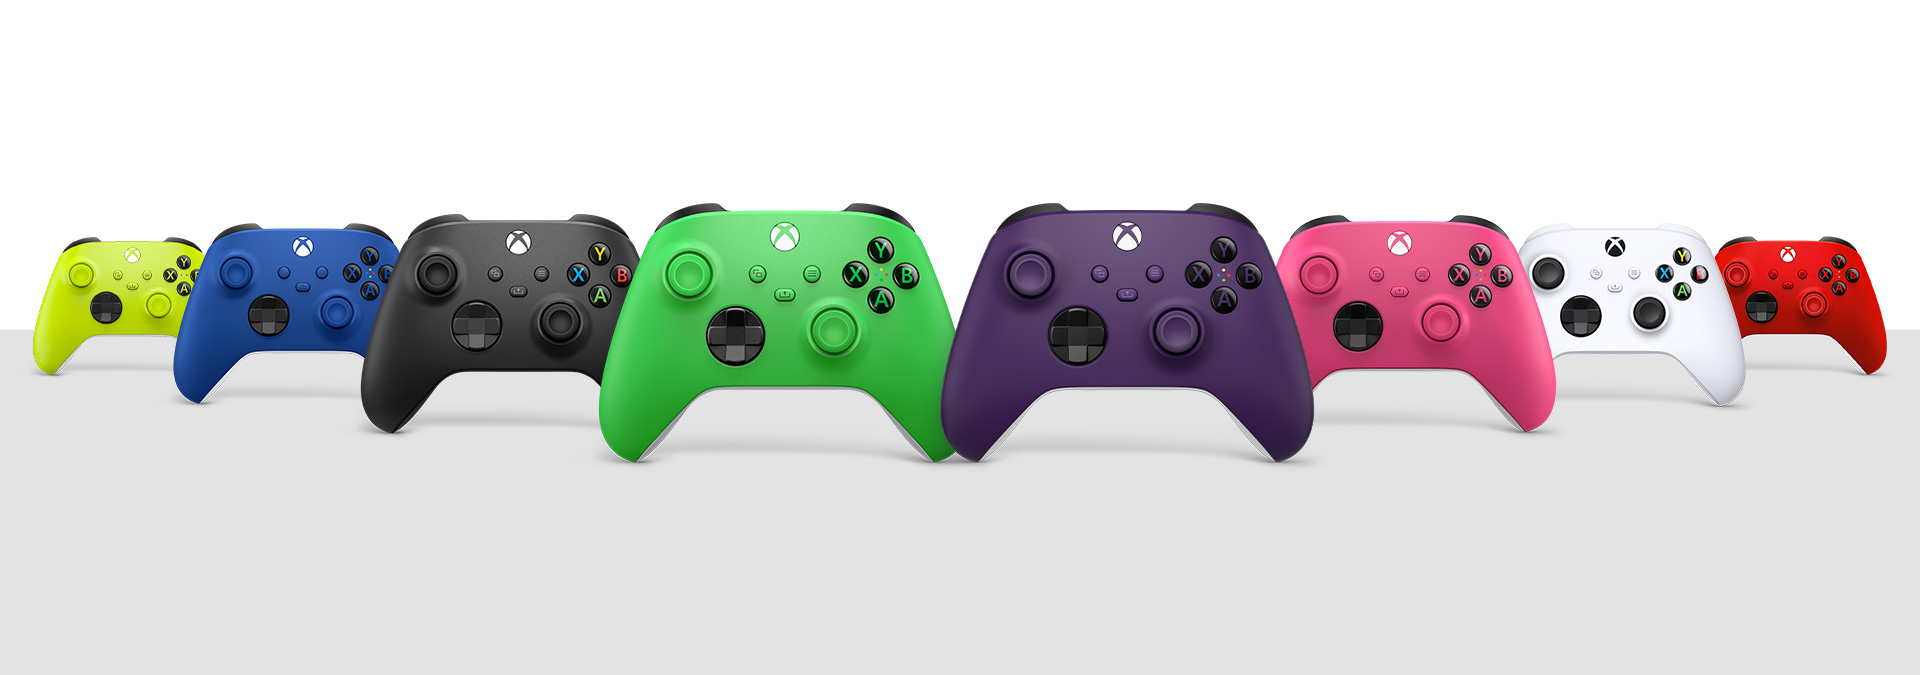 Xbox Wireless Controller Carbon Black, Robot White, Shock Blue, Pulse Red, Electric Volt, Deep Pink, Velocity Green, and Astral Purple